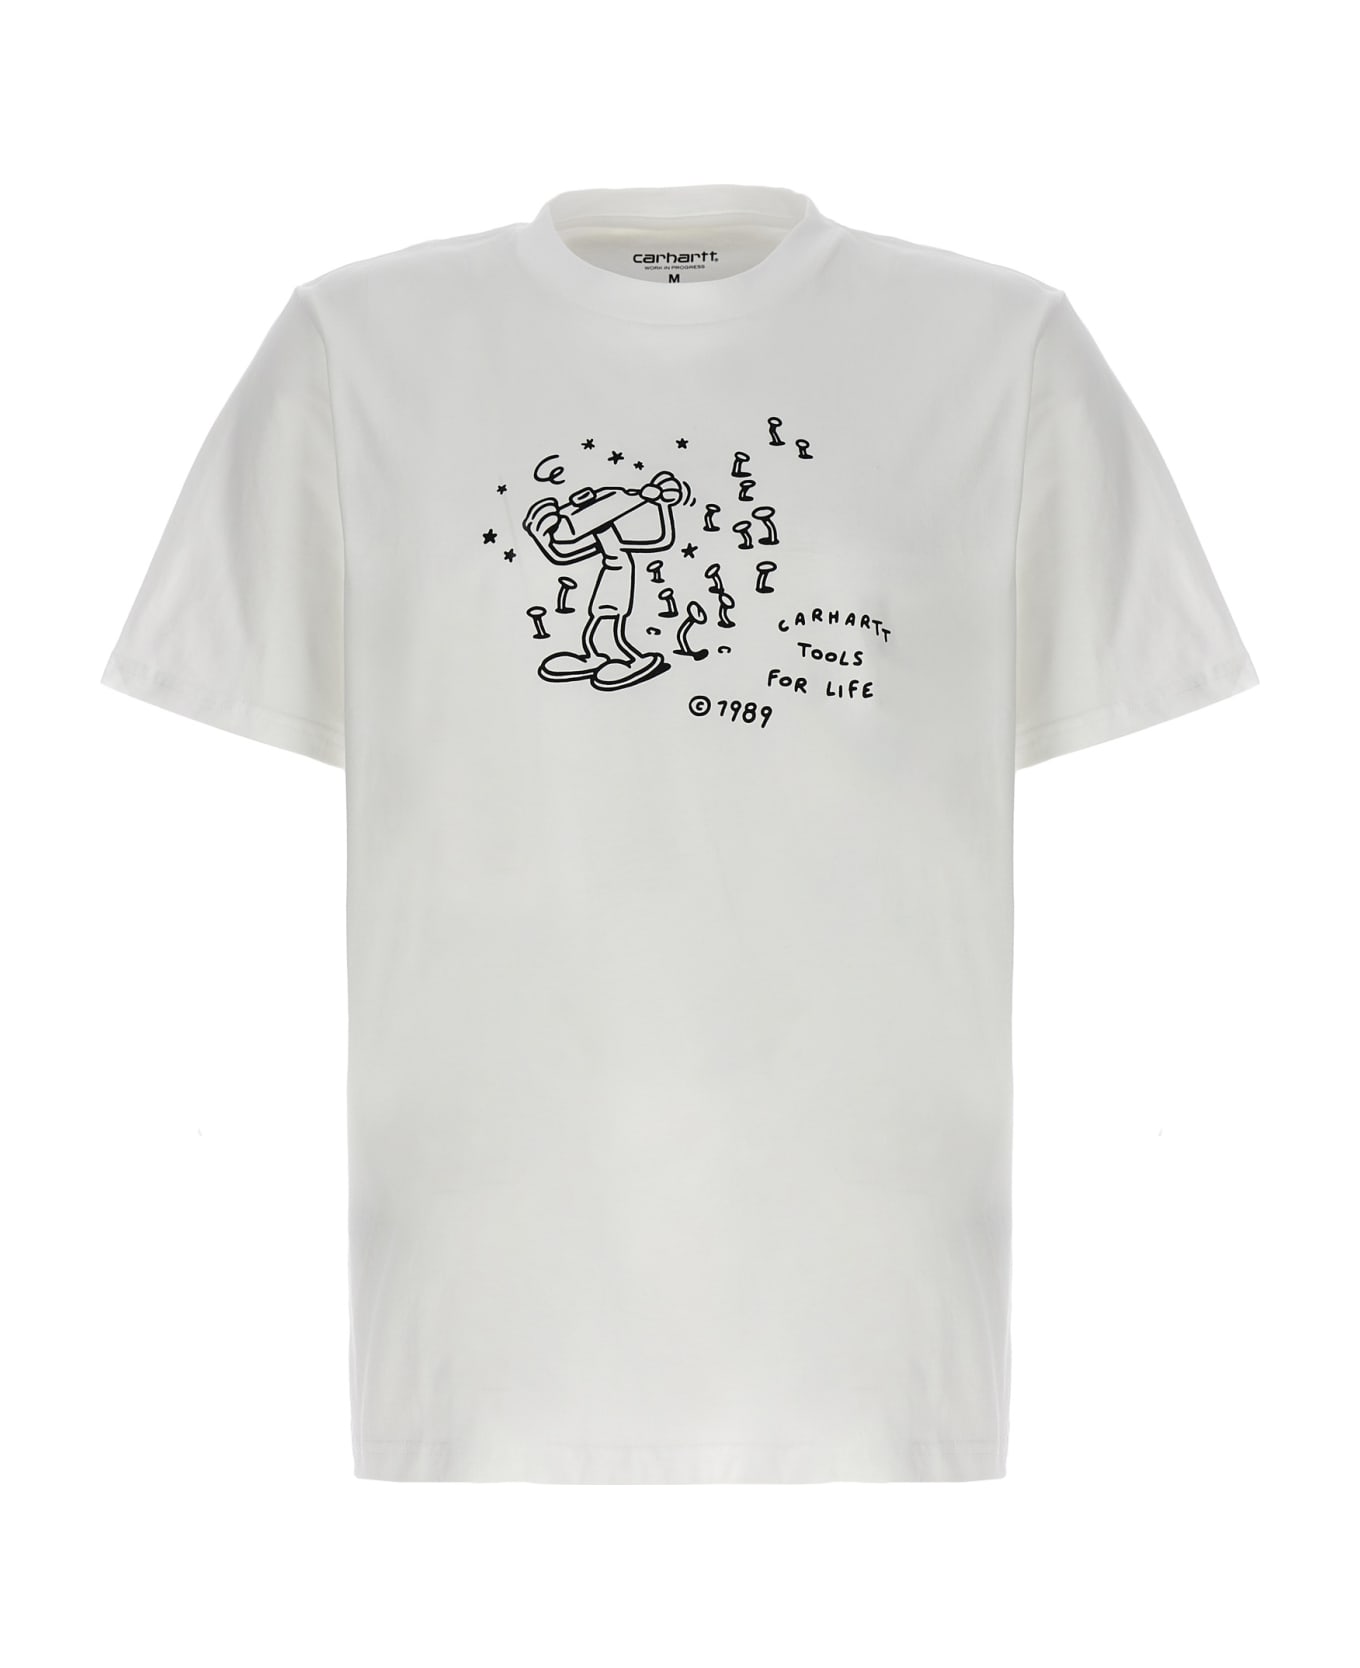 Carhartt WIP 'tools For Life' T-shirt - White